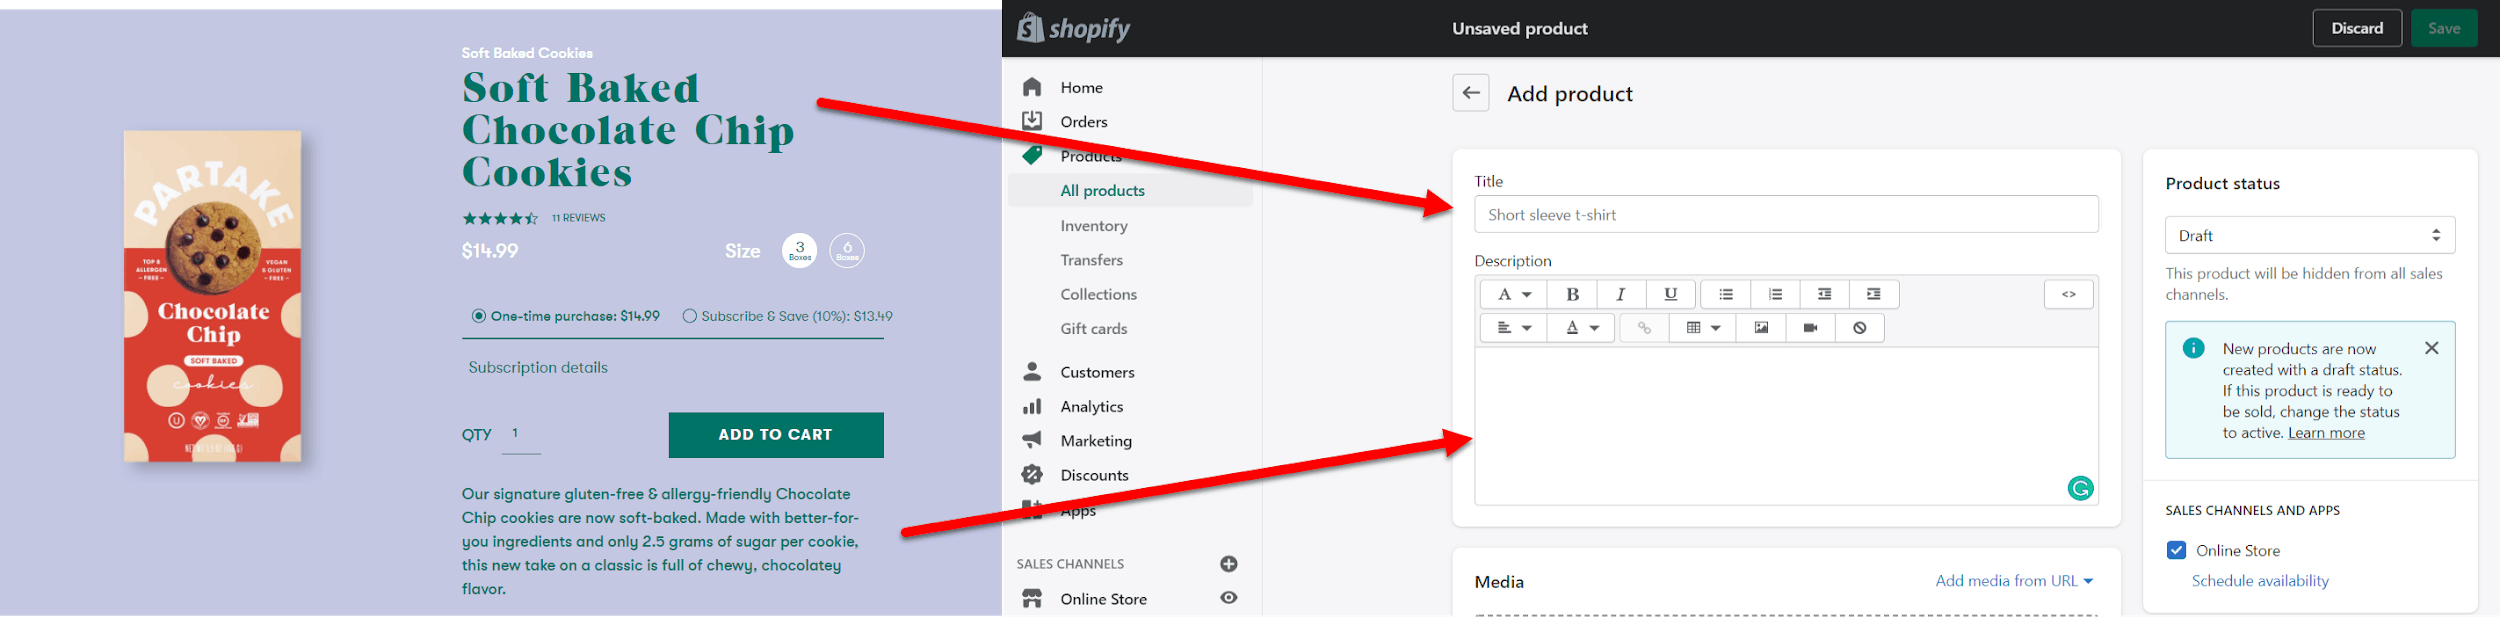 Shopify product and description